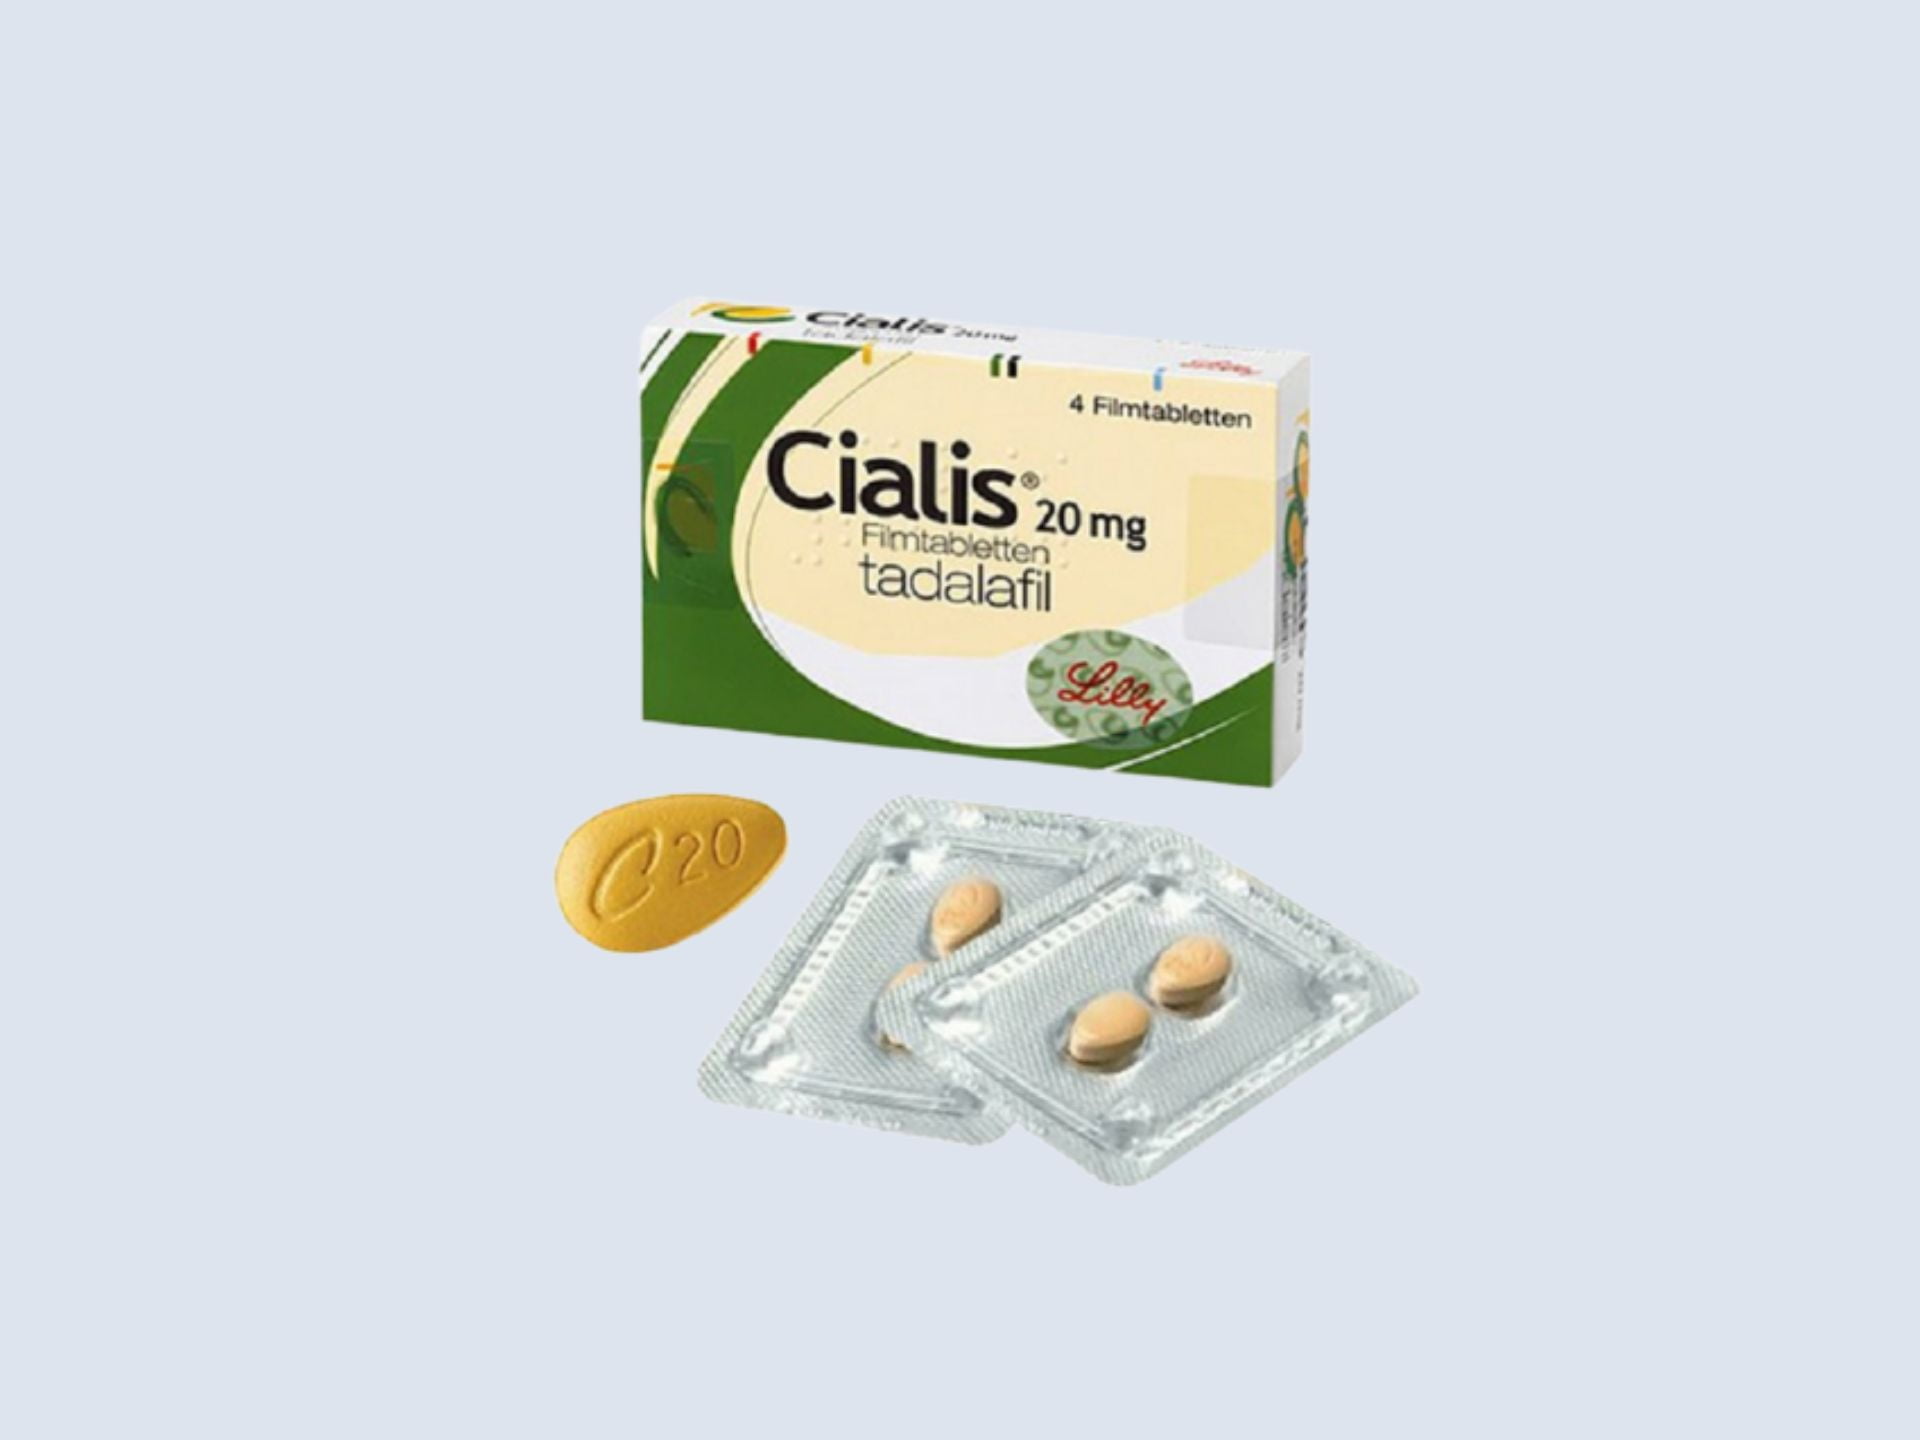 ilovechems cialis tadalafil 20mg for sale-ilovechems